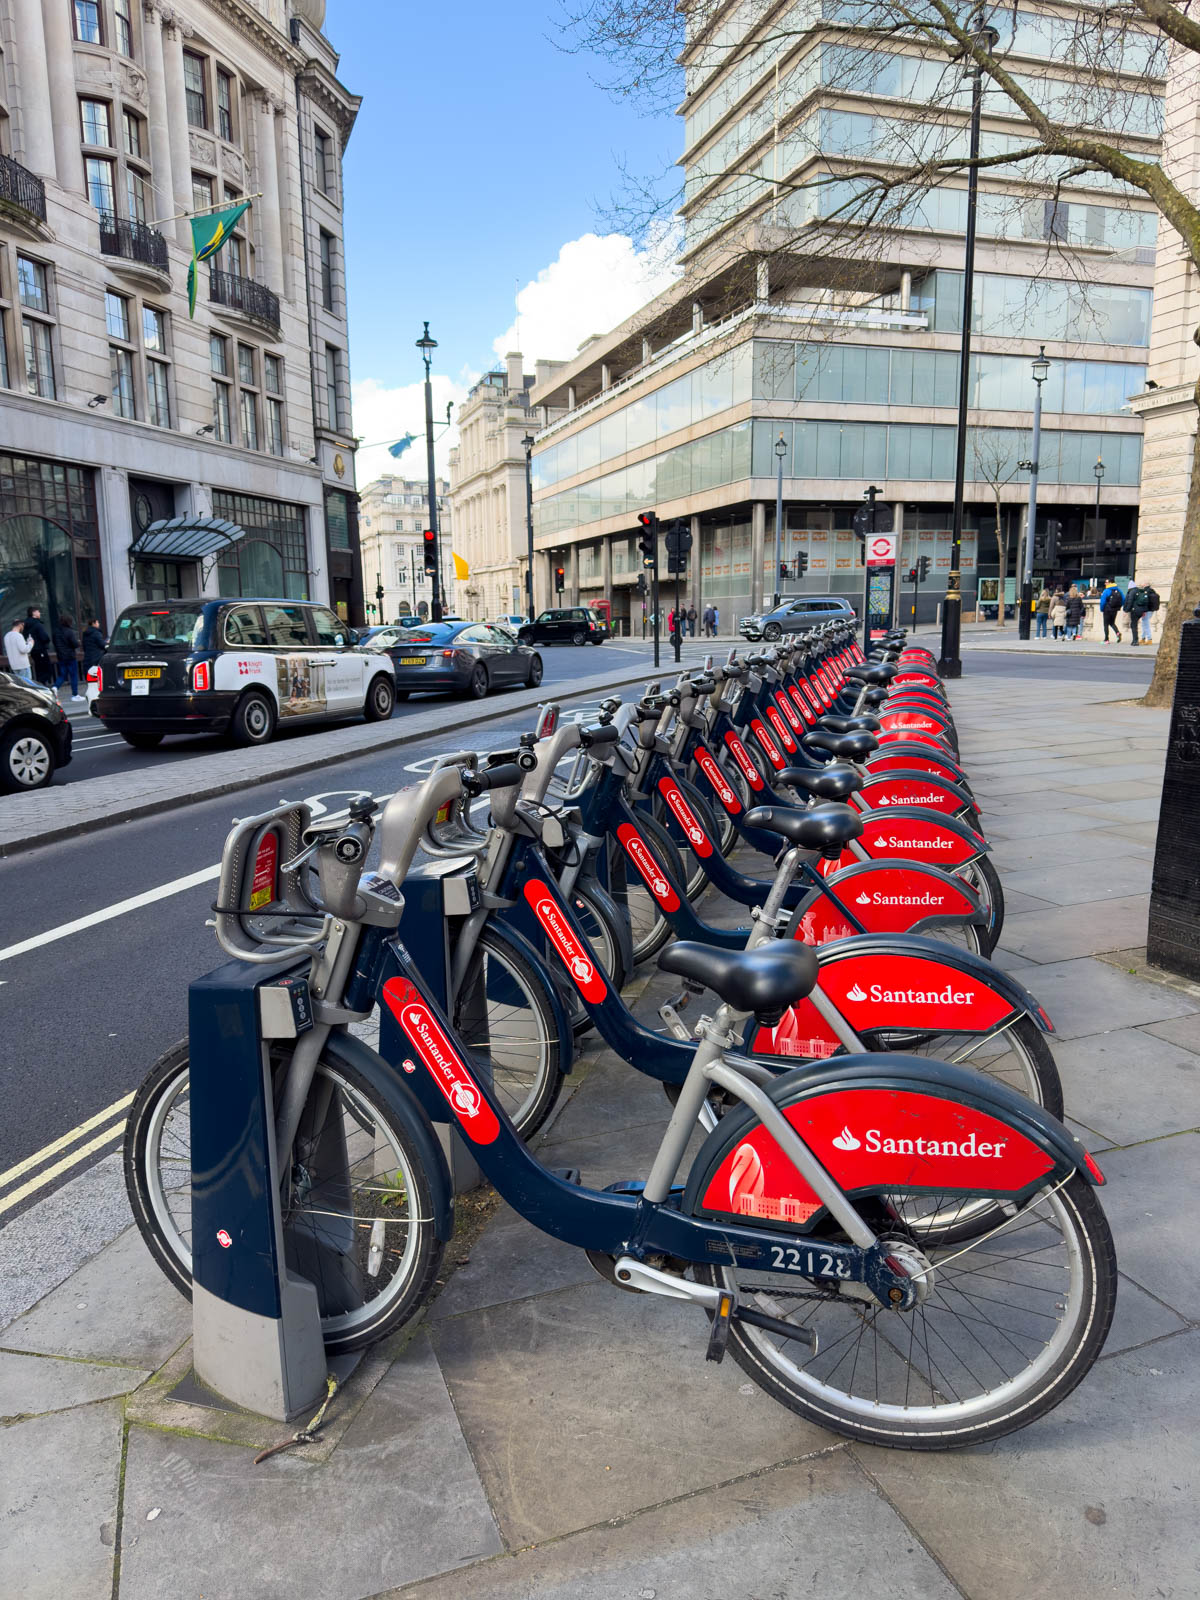 A row of bikes for rent in London.